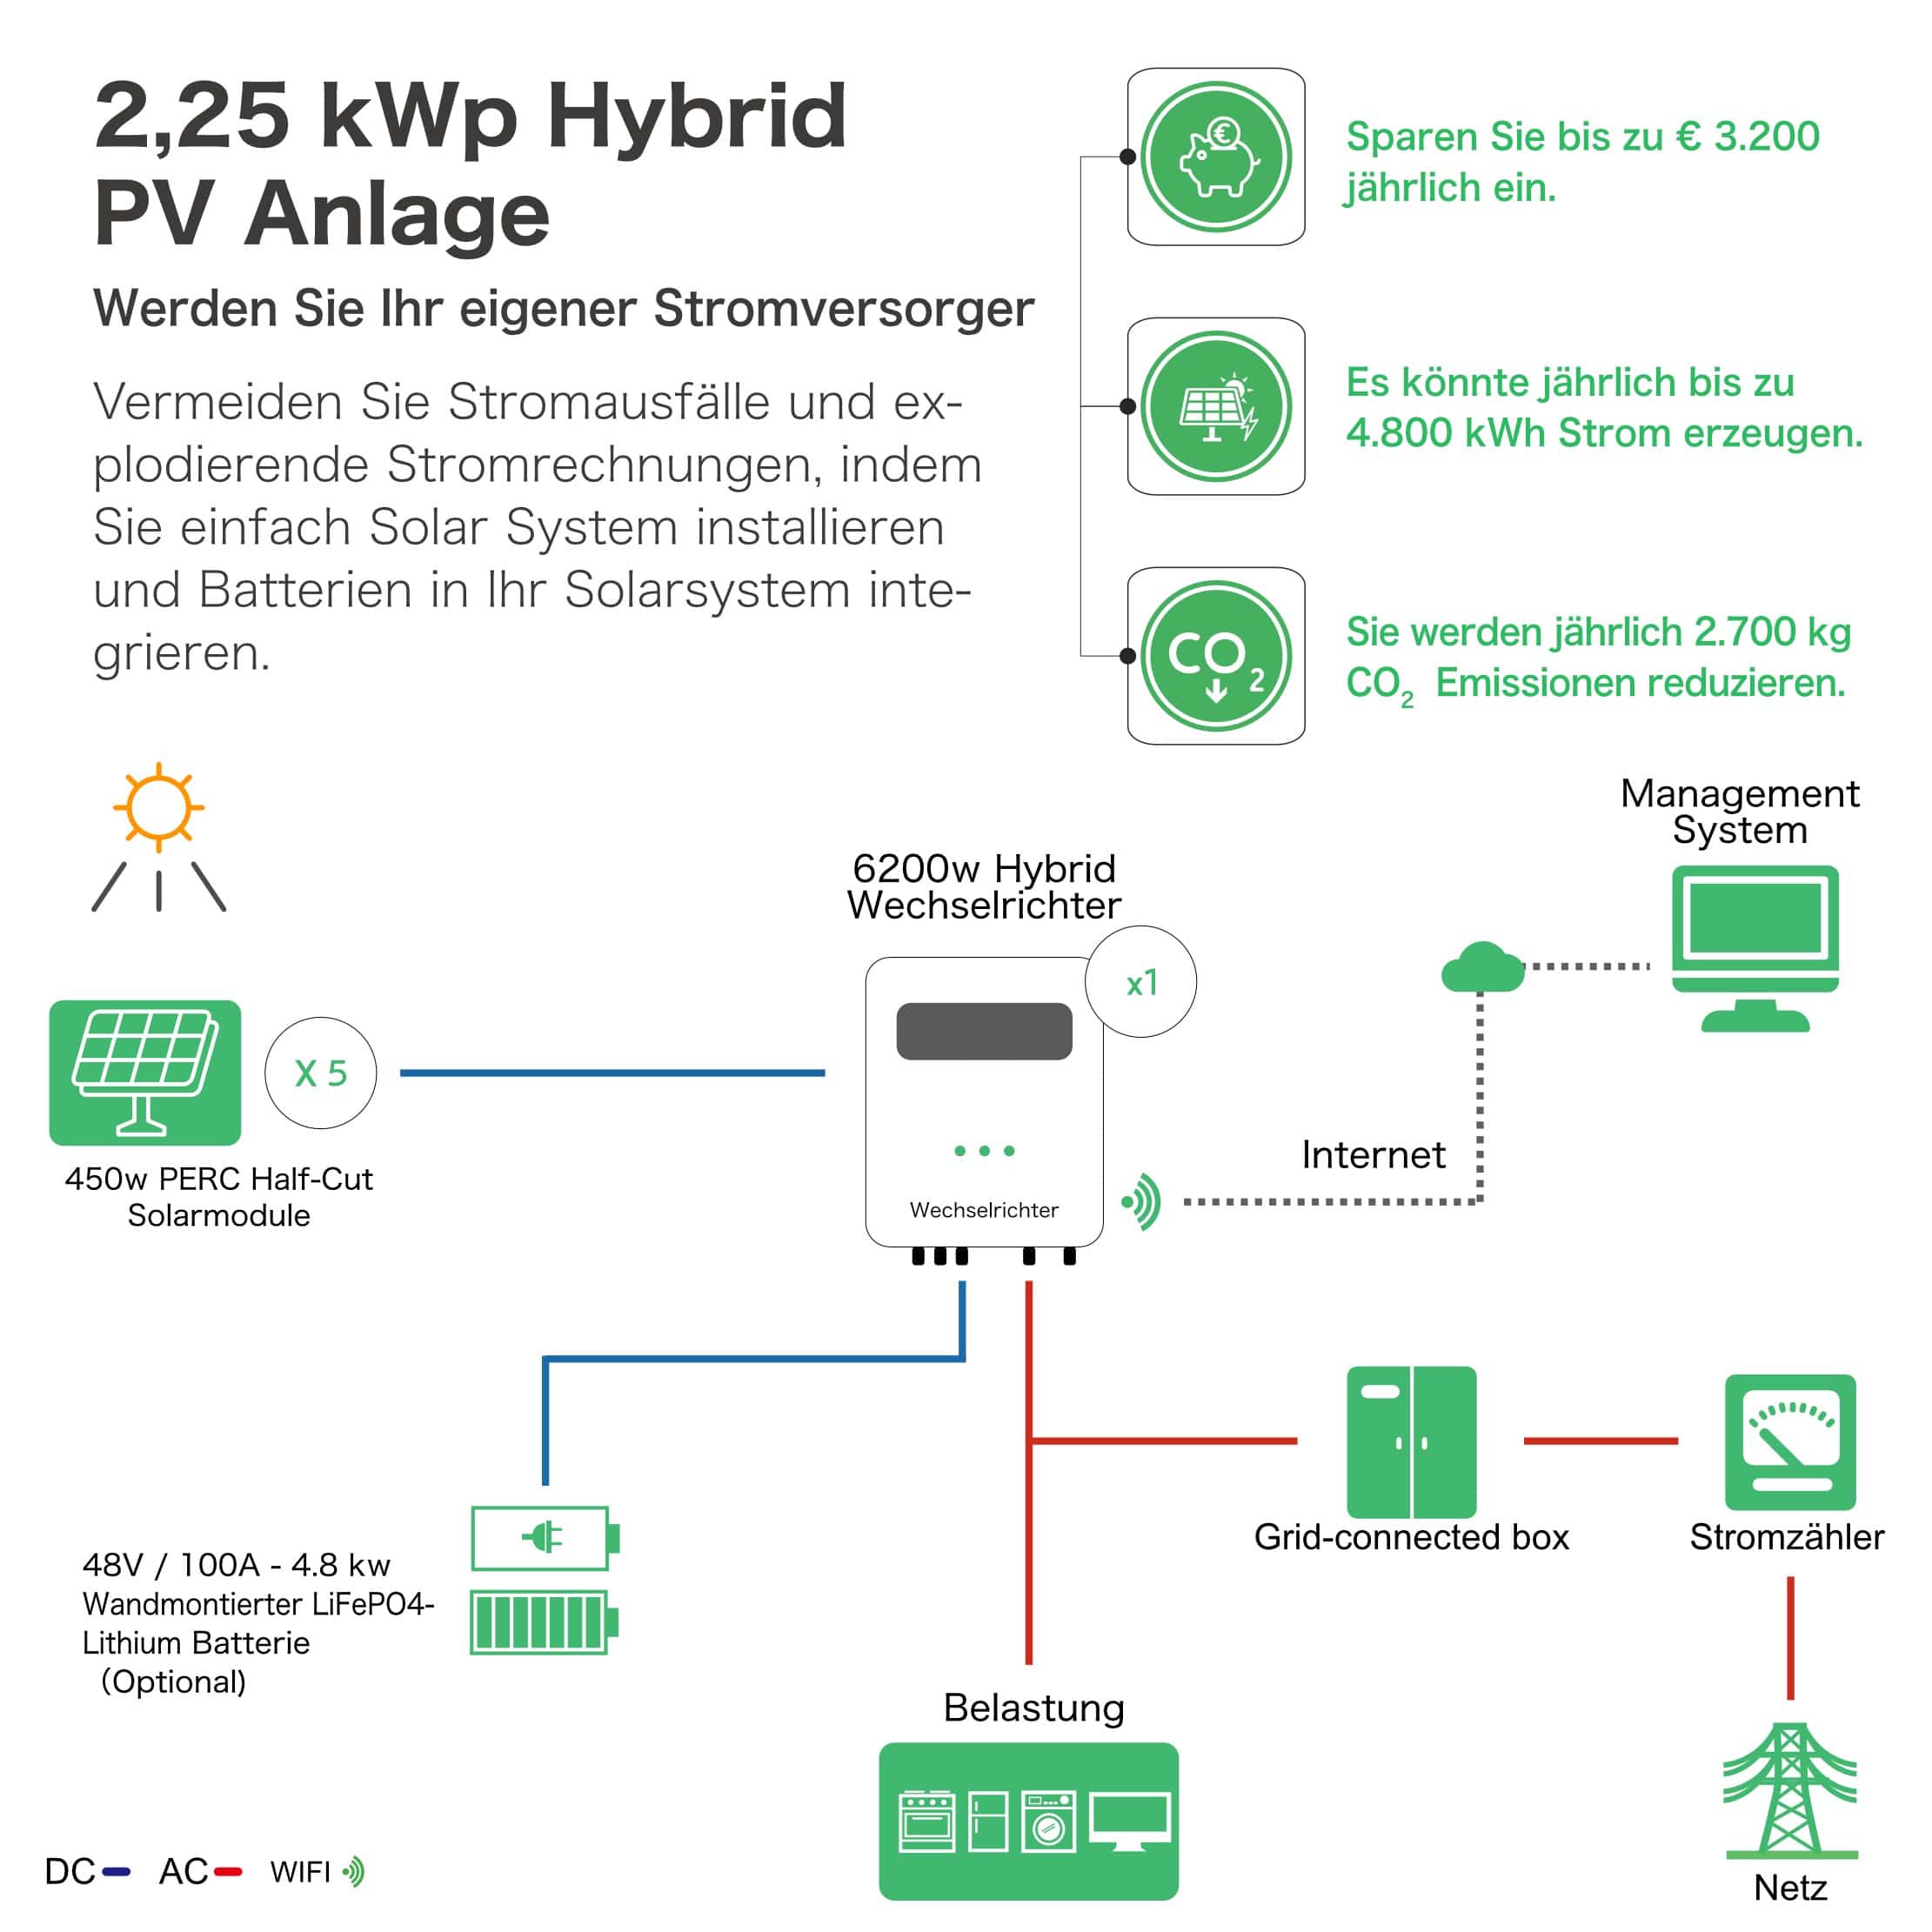 https://usercontent.one/wp/www.sterneberg.com/wp-content/uploads/2023/04/2.25-kWp-PV-System-without-Battery-002.jpg?media=1665842249